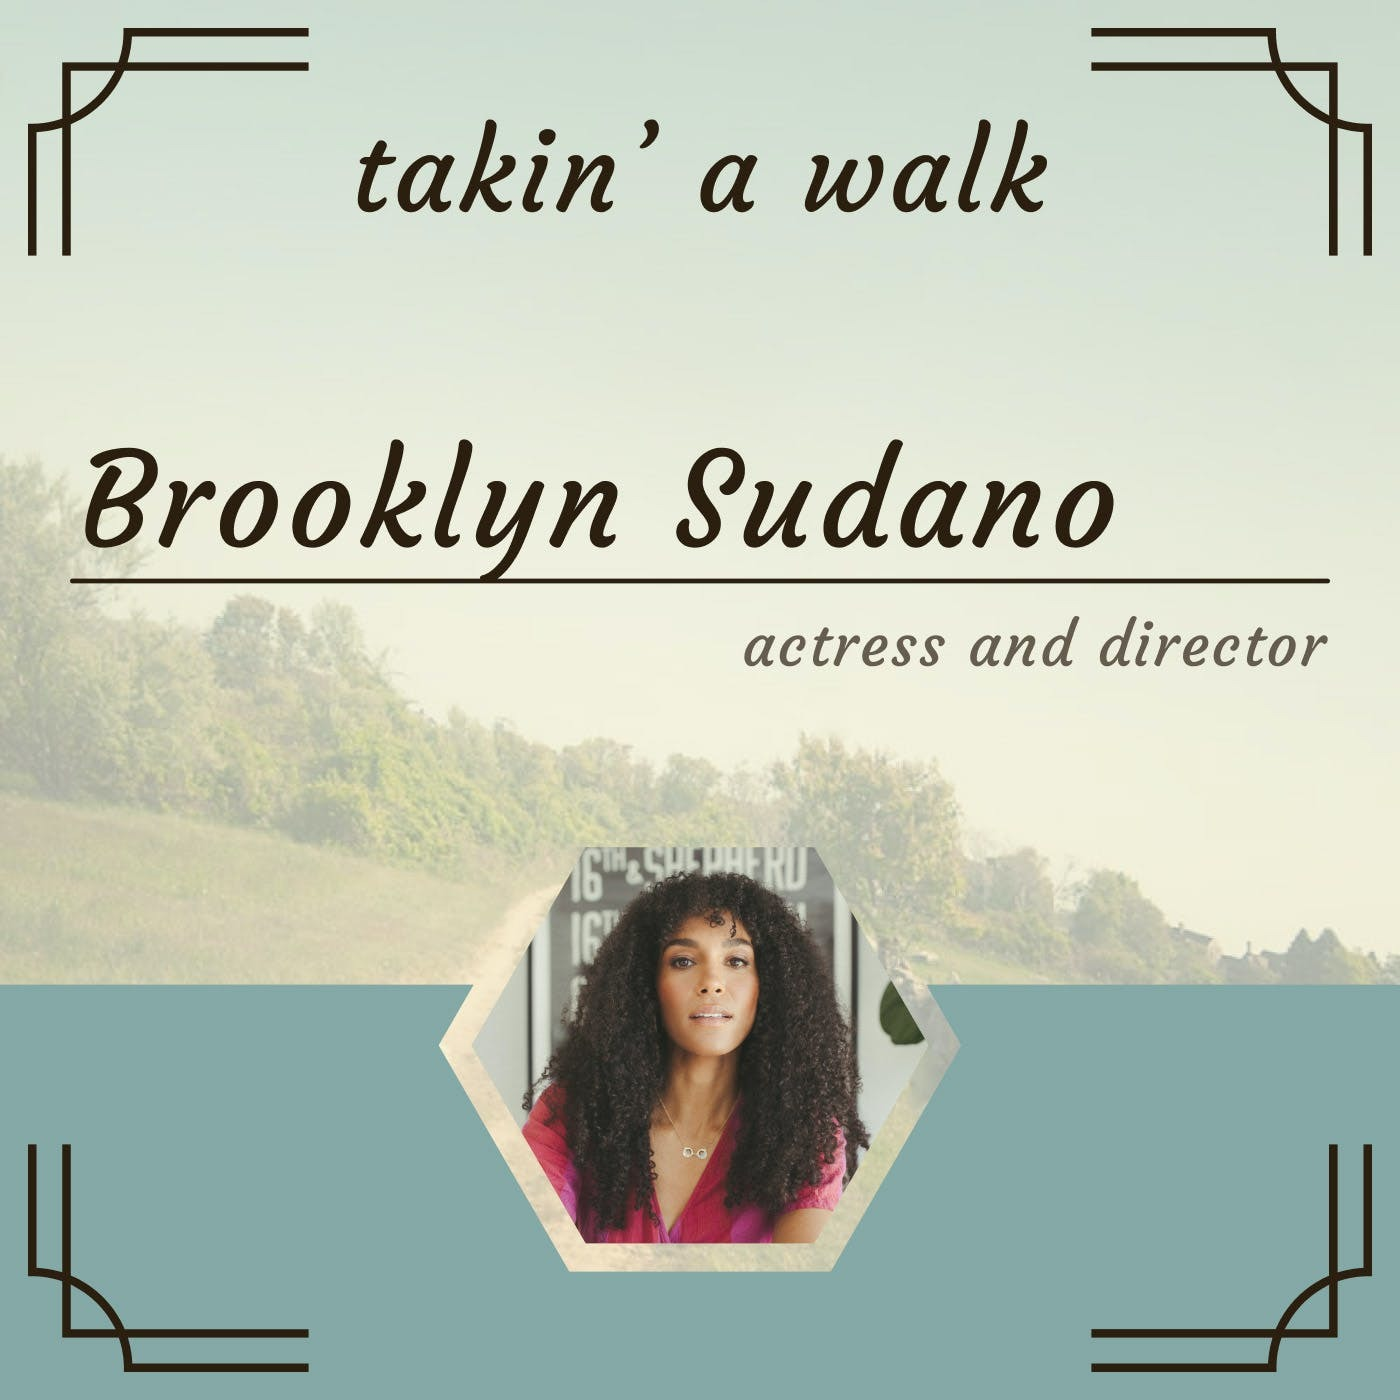 Actress and Director Brooklyn Sudano discusses her directorial debut with a documentary on her mother Donna Summer.